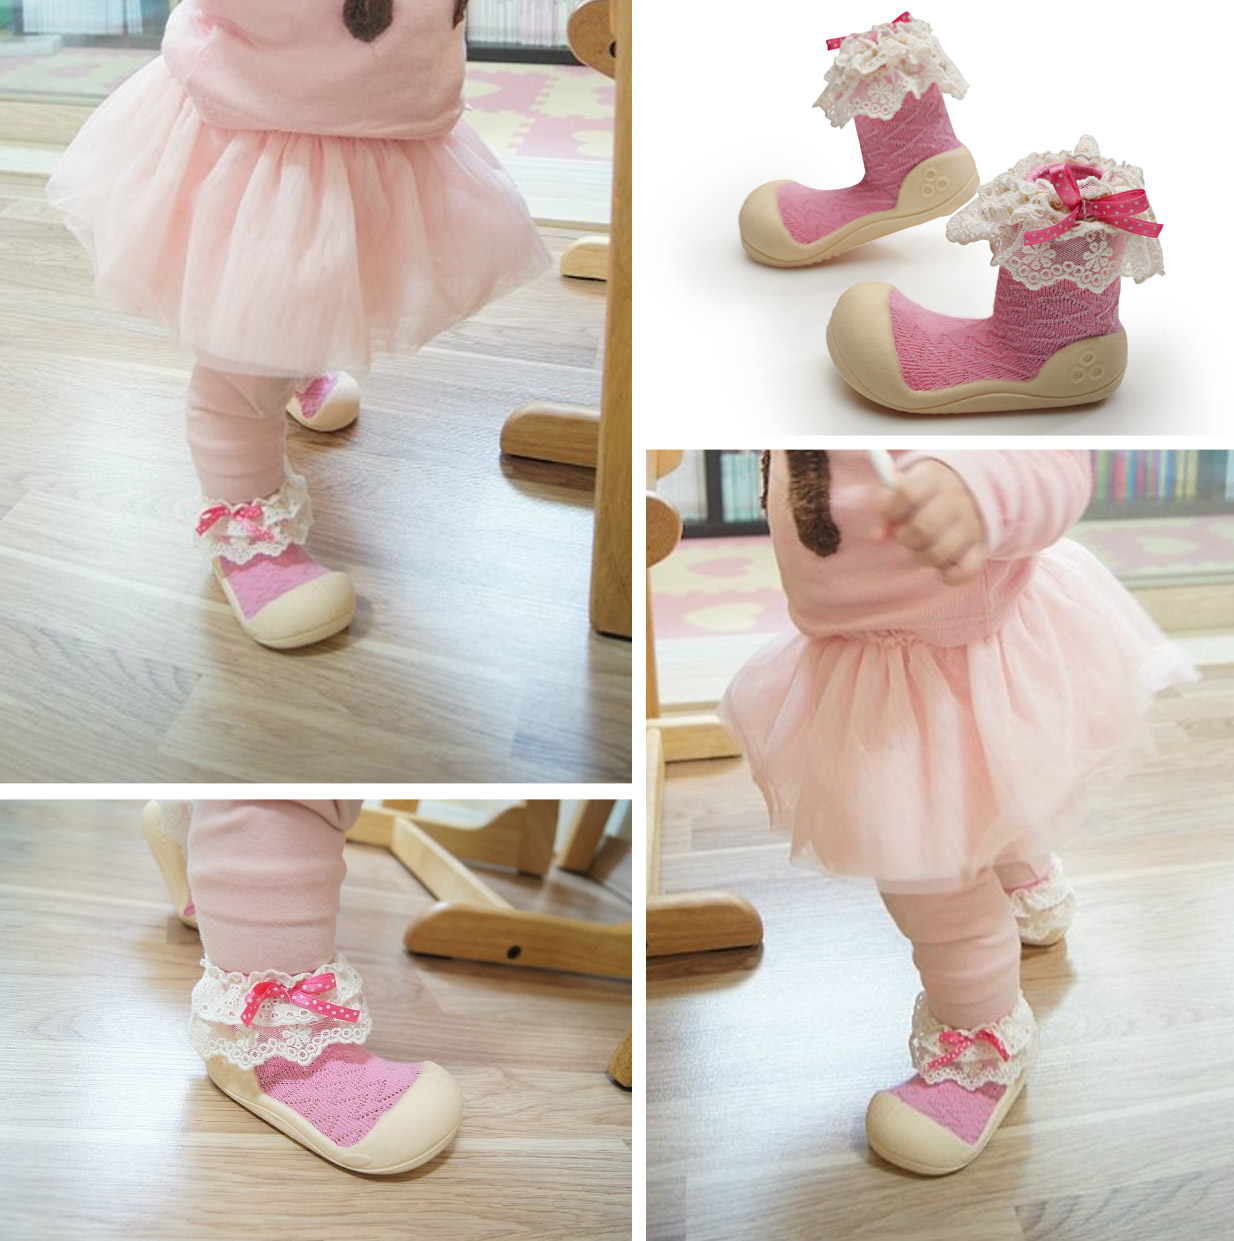 attipas baby shoes